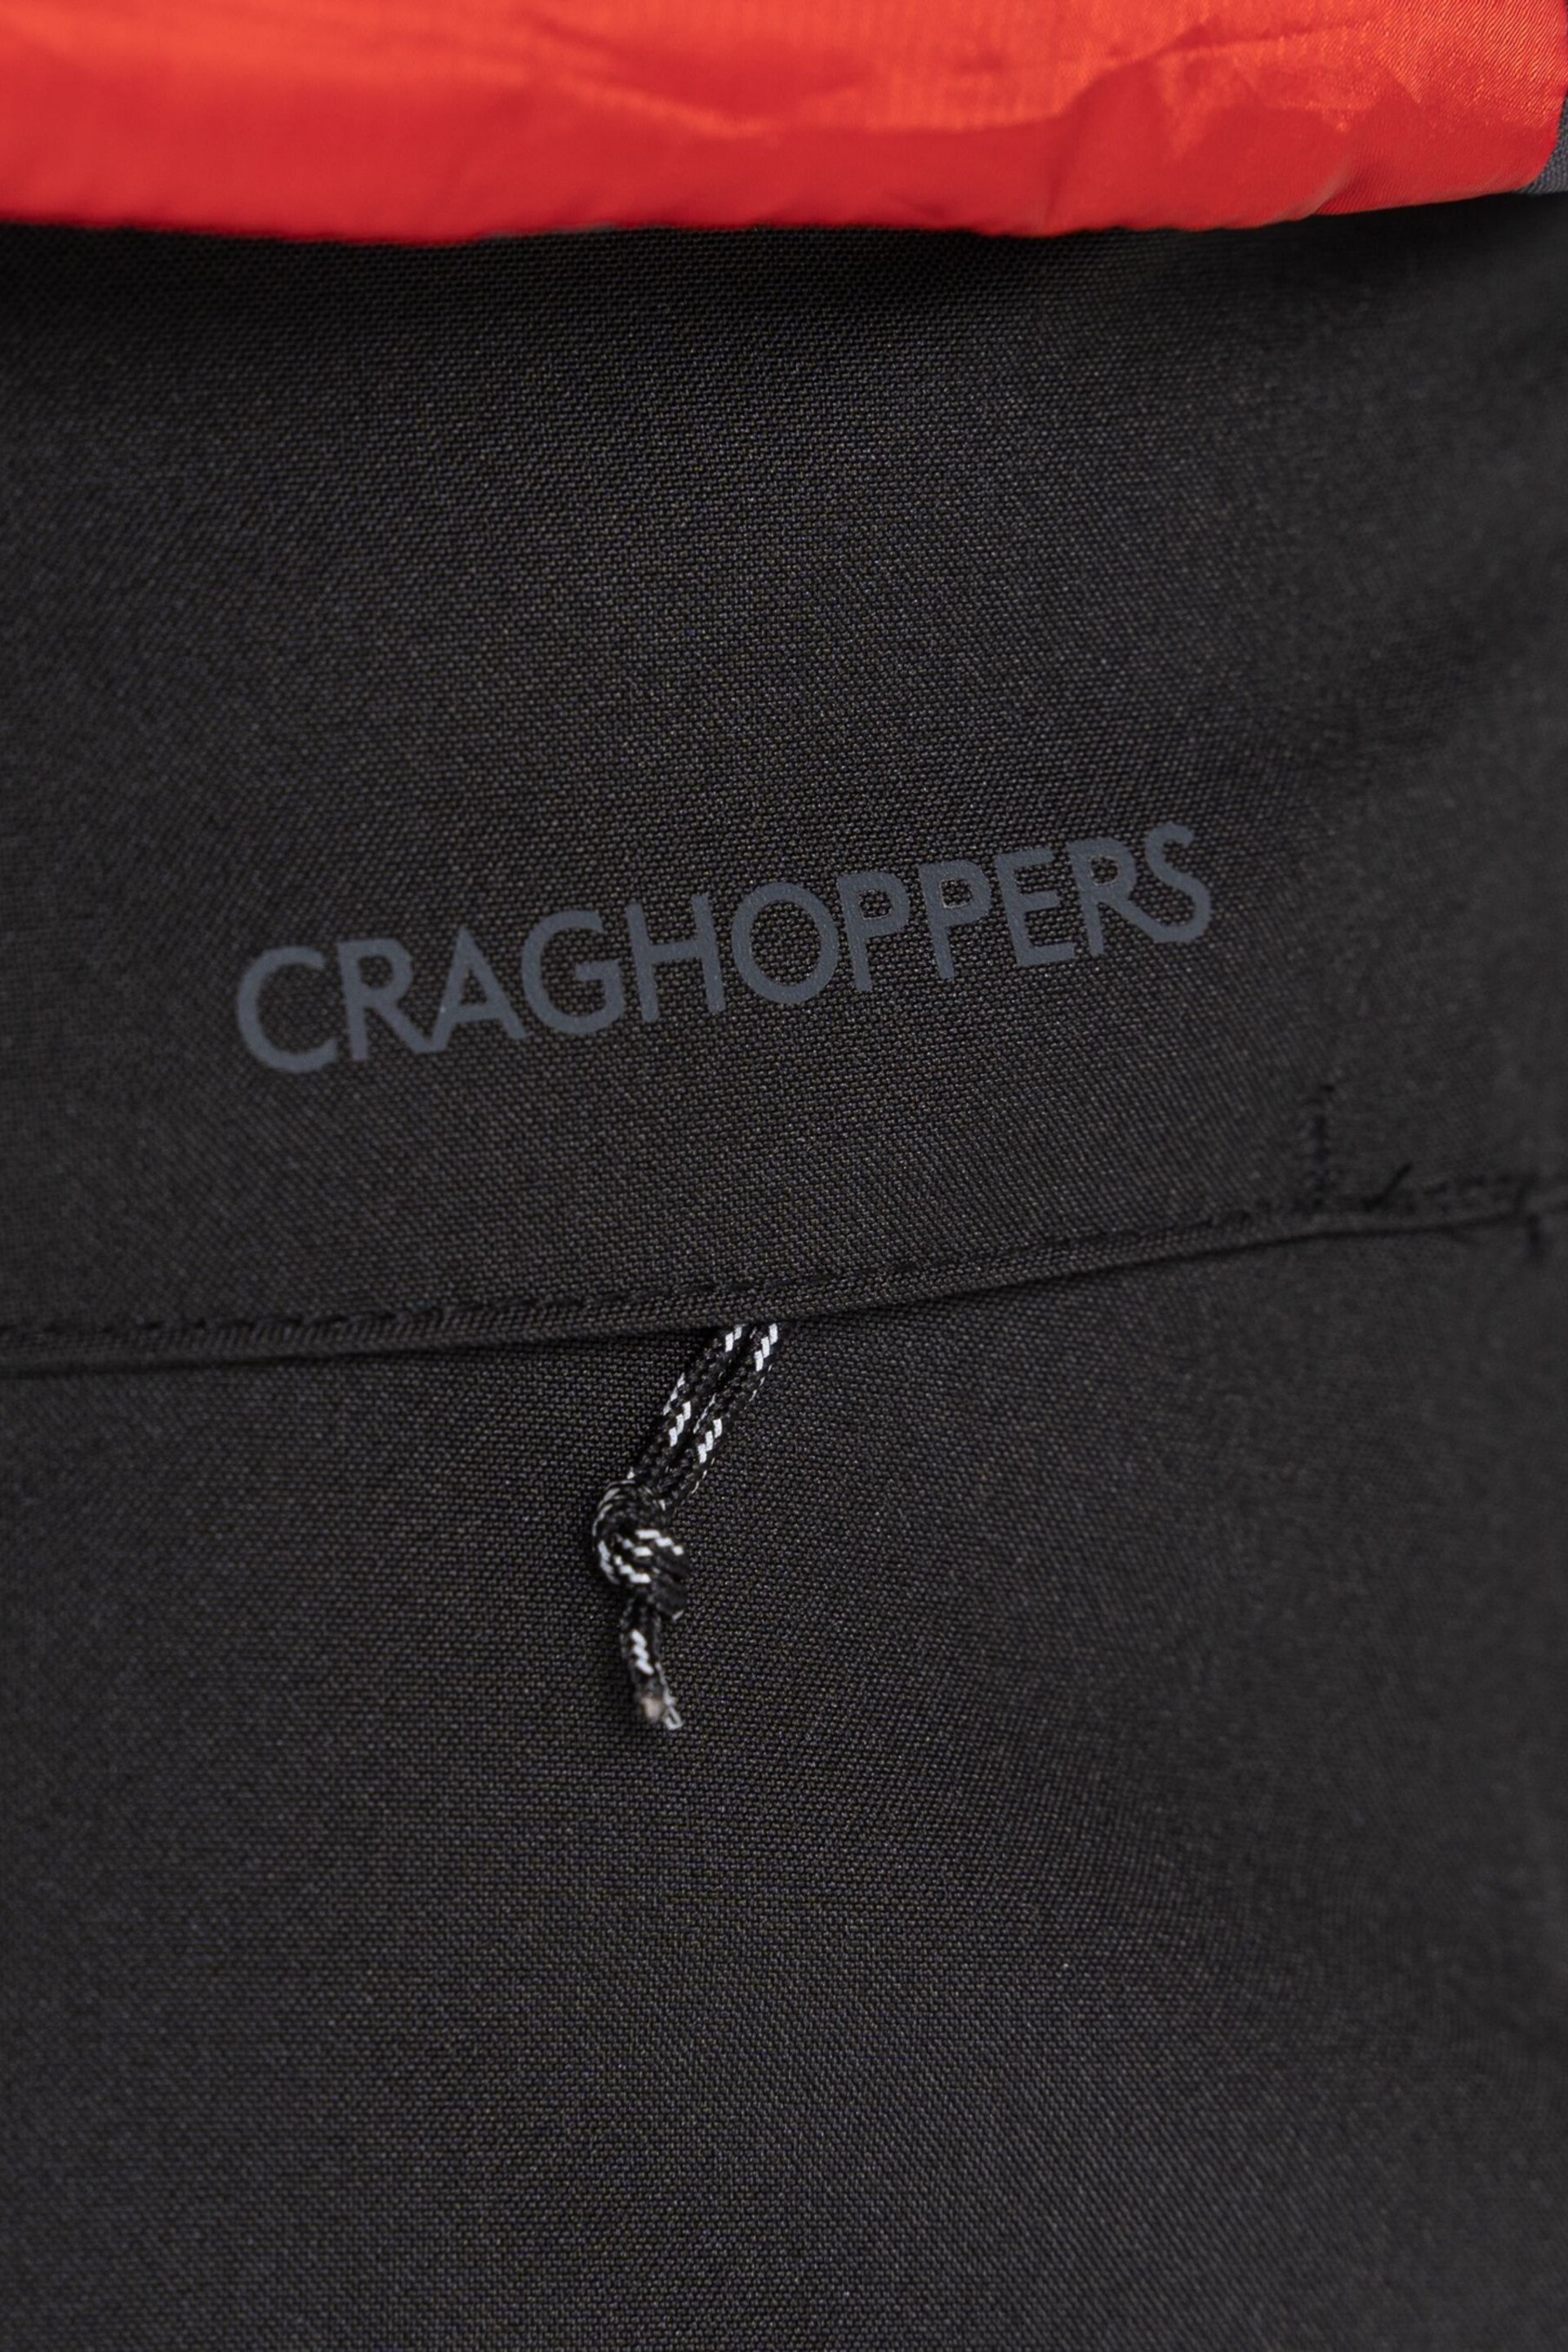 Craghoppers Black Steall Thermo Trousers - Image 6 of 6